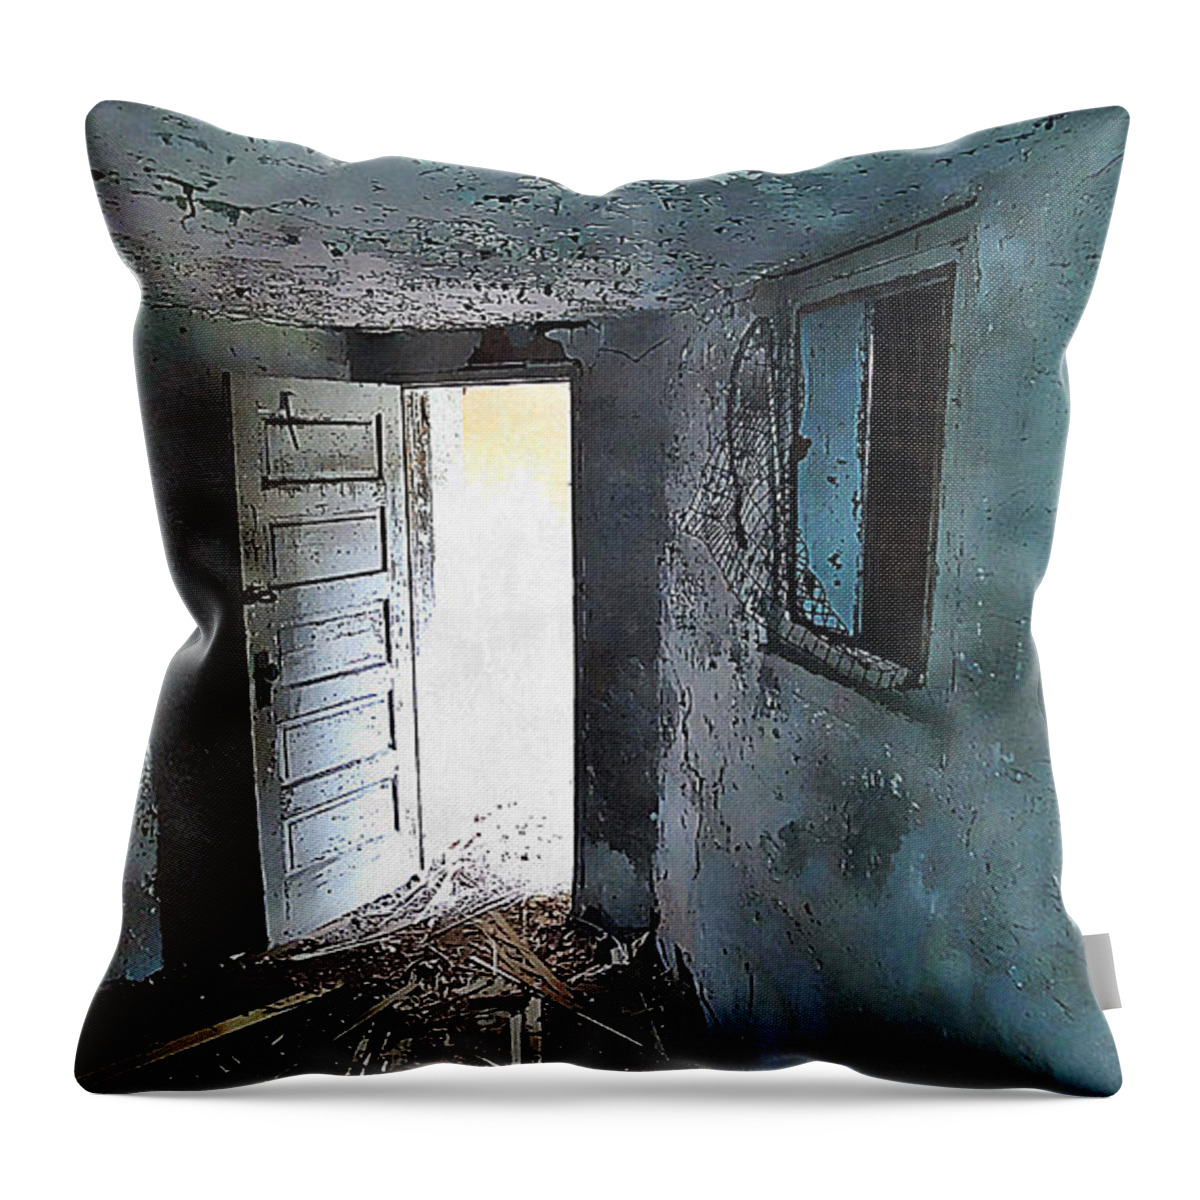 Derelict Throw Pillow featuring the painting 1h by Mark Baranowski